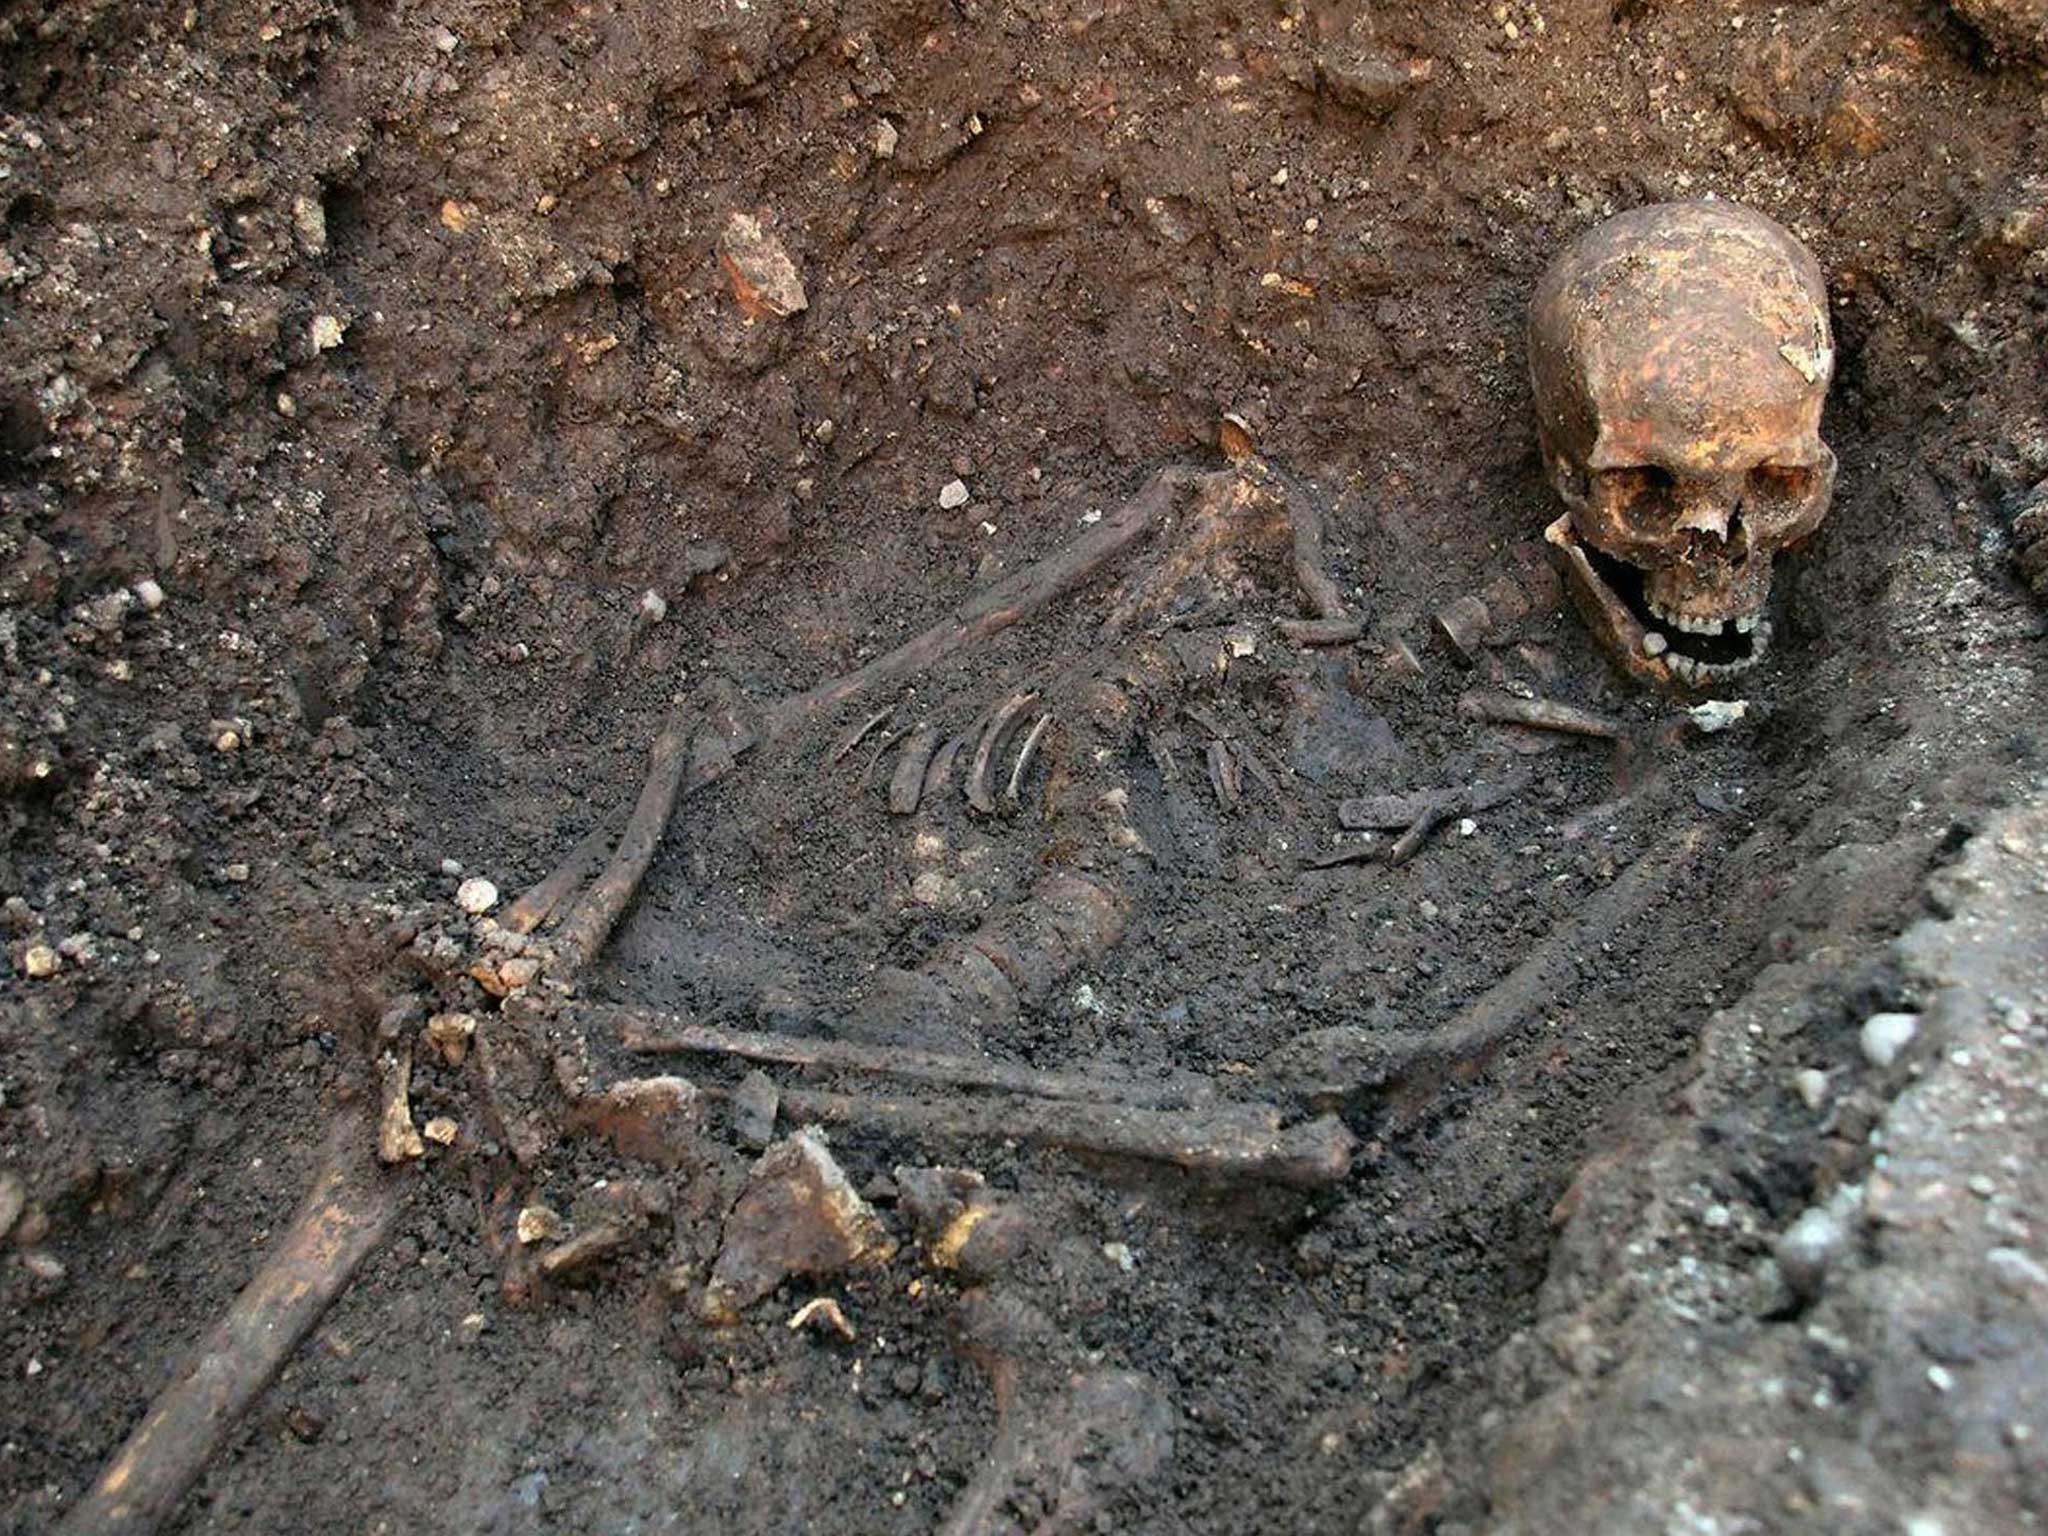 Scientific tests confirmed in February 2013 that the skeleton with spinal curvature dug up from underneath a council car park was that of Ricard III